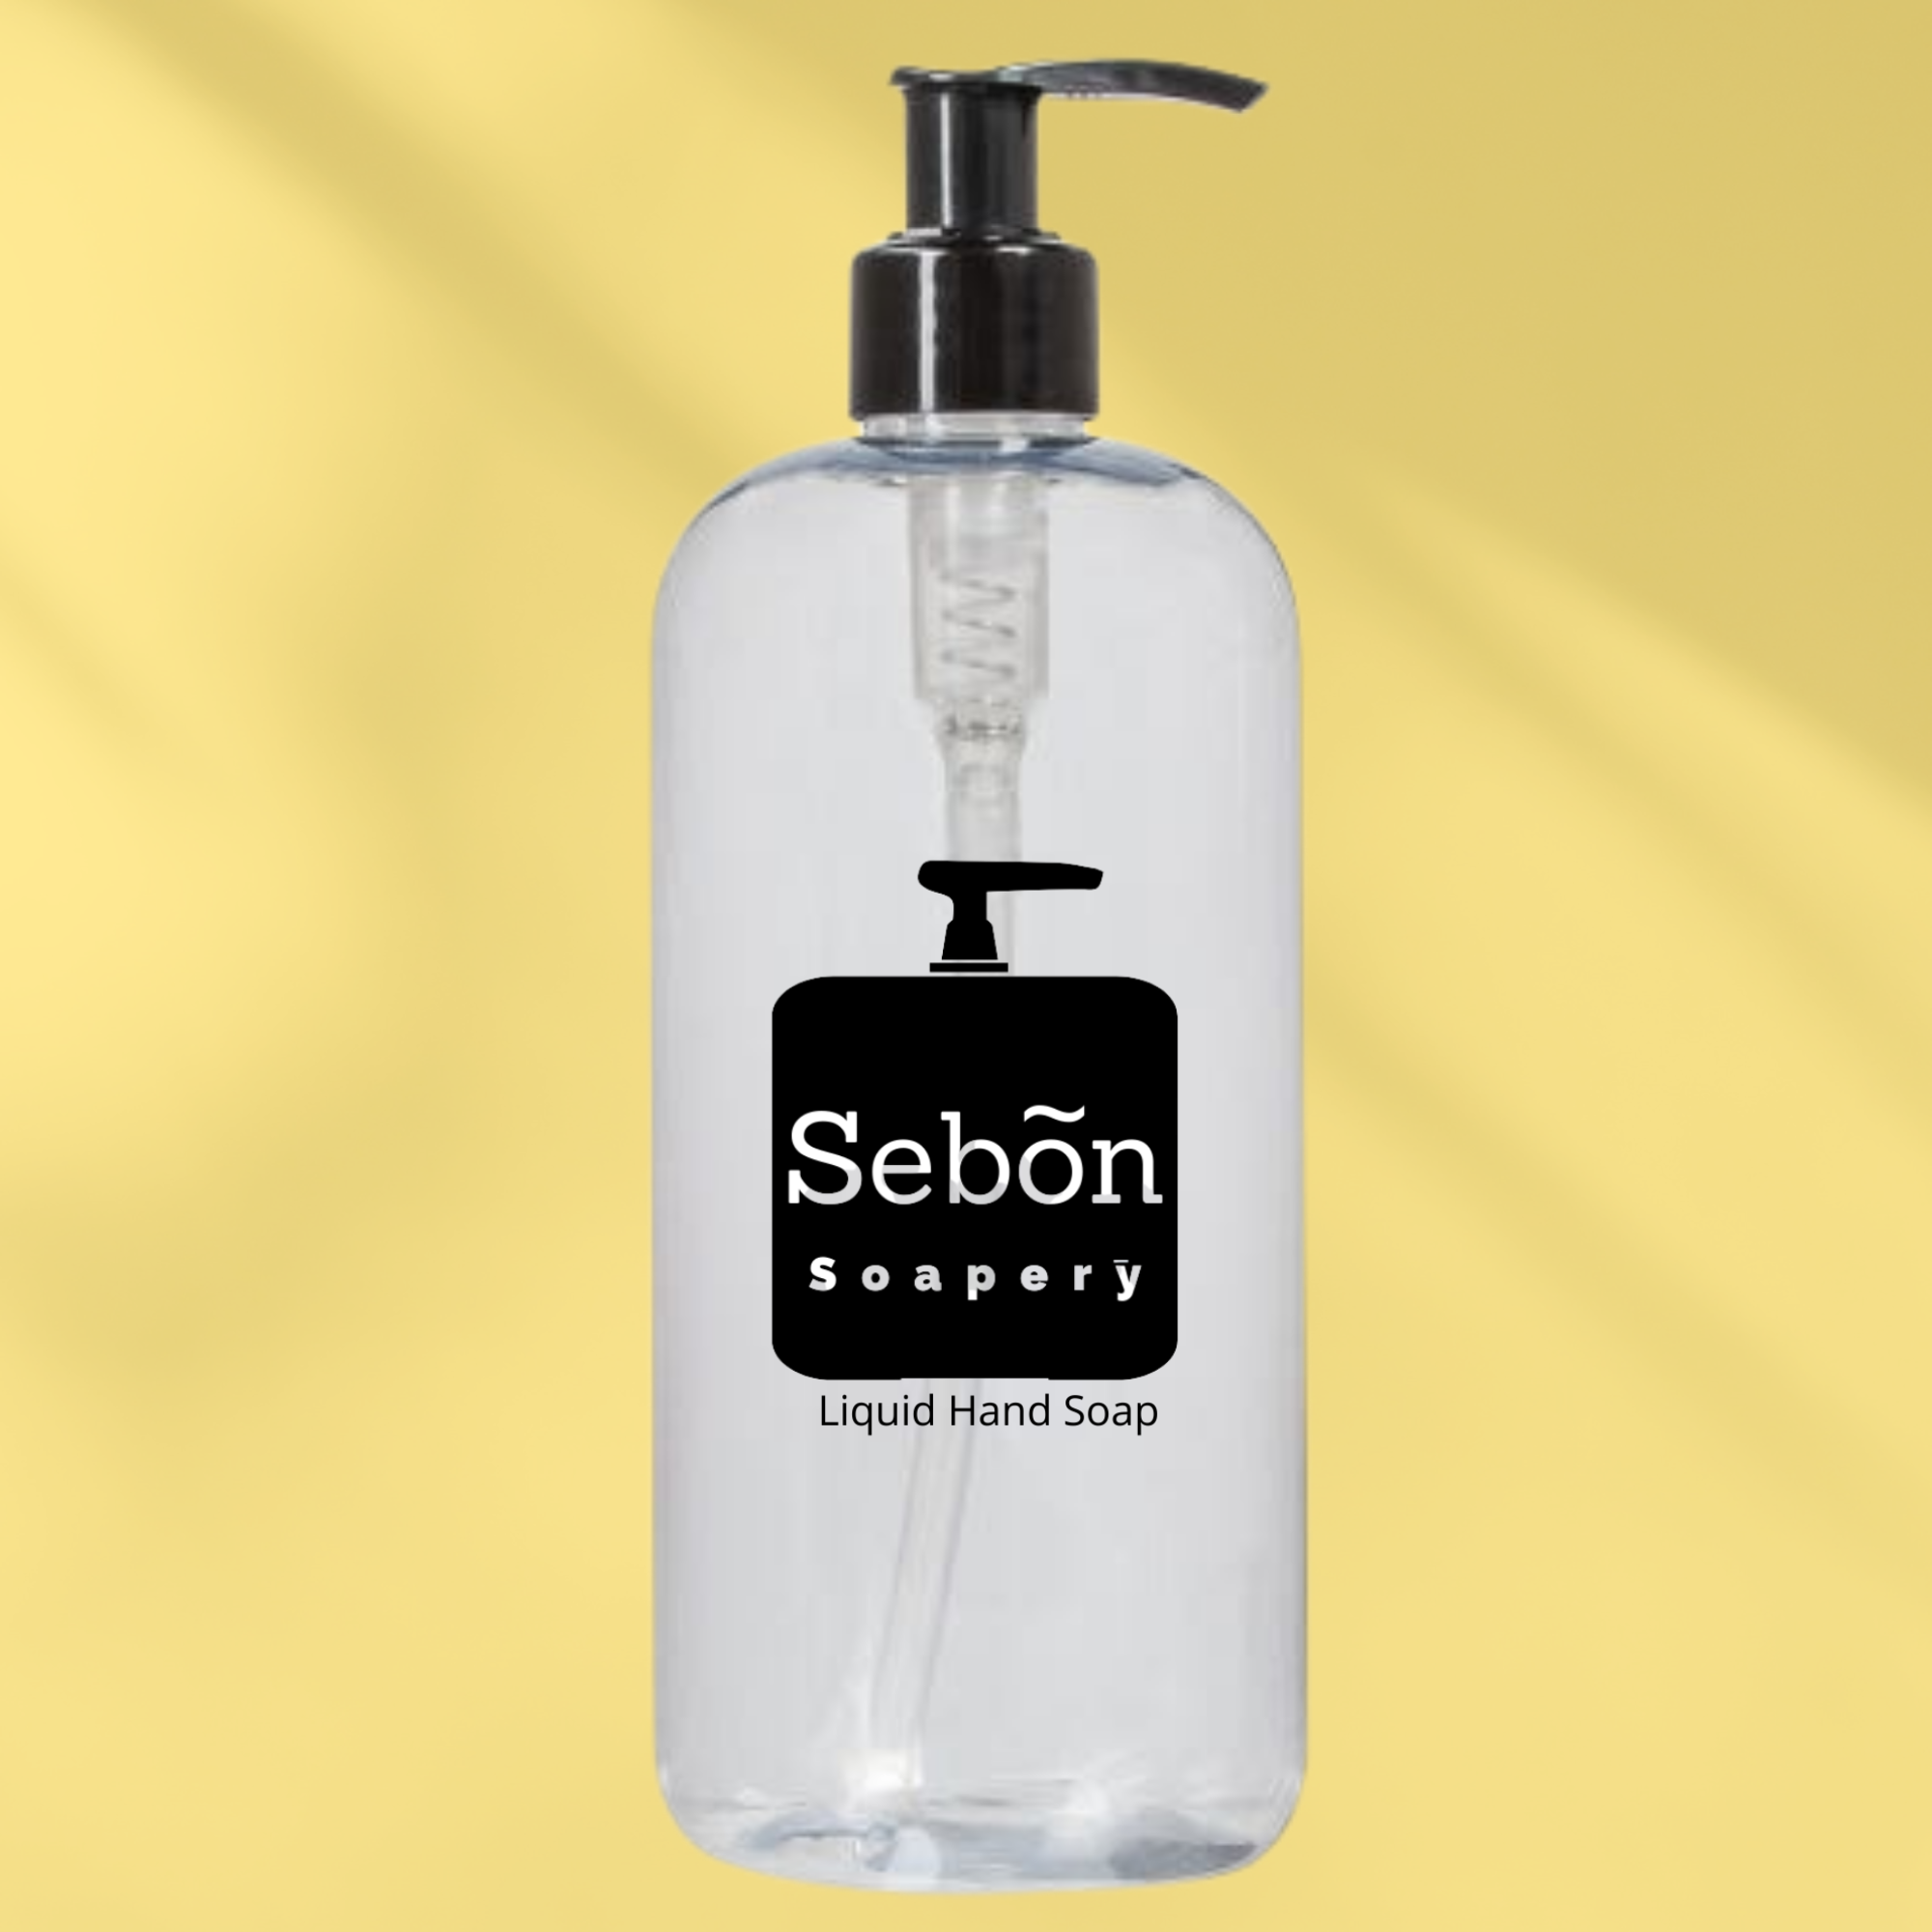 Sebon Blackberries & Tulips Scented Liquid Hand Soap with Olive Oil